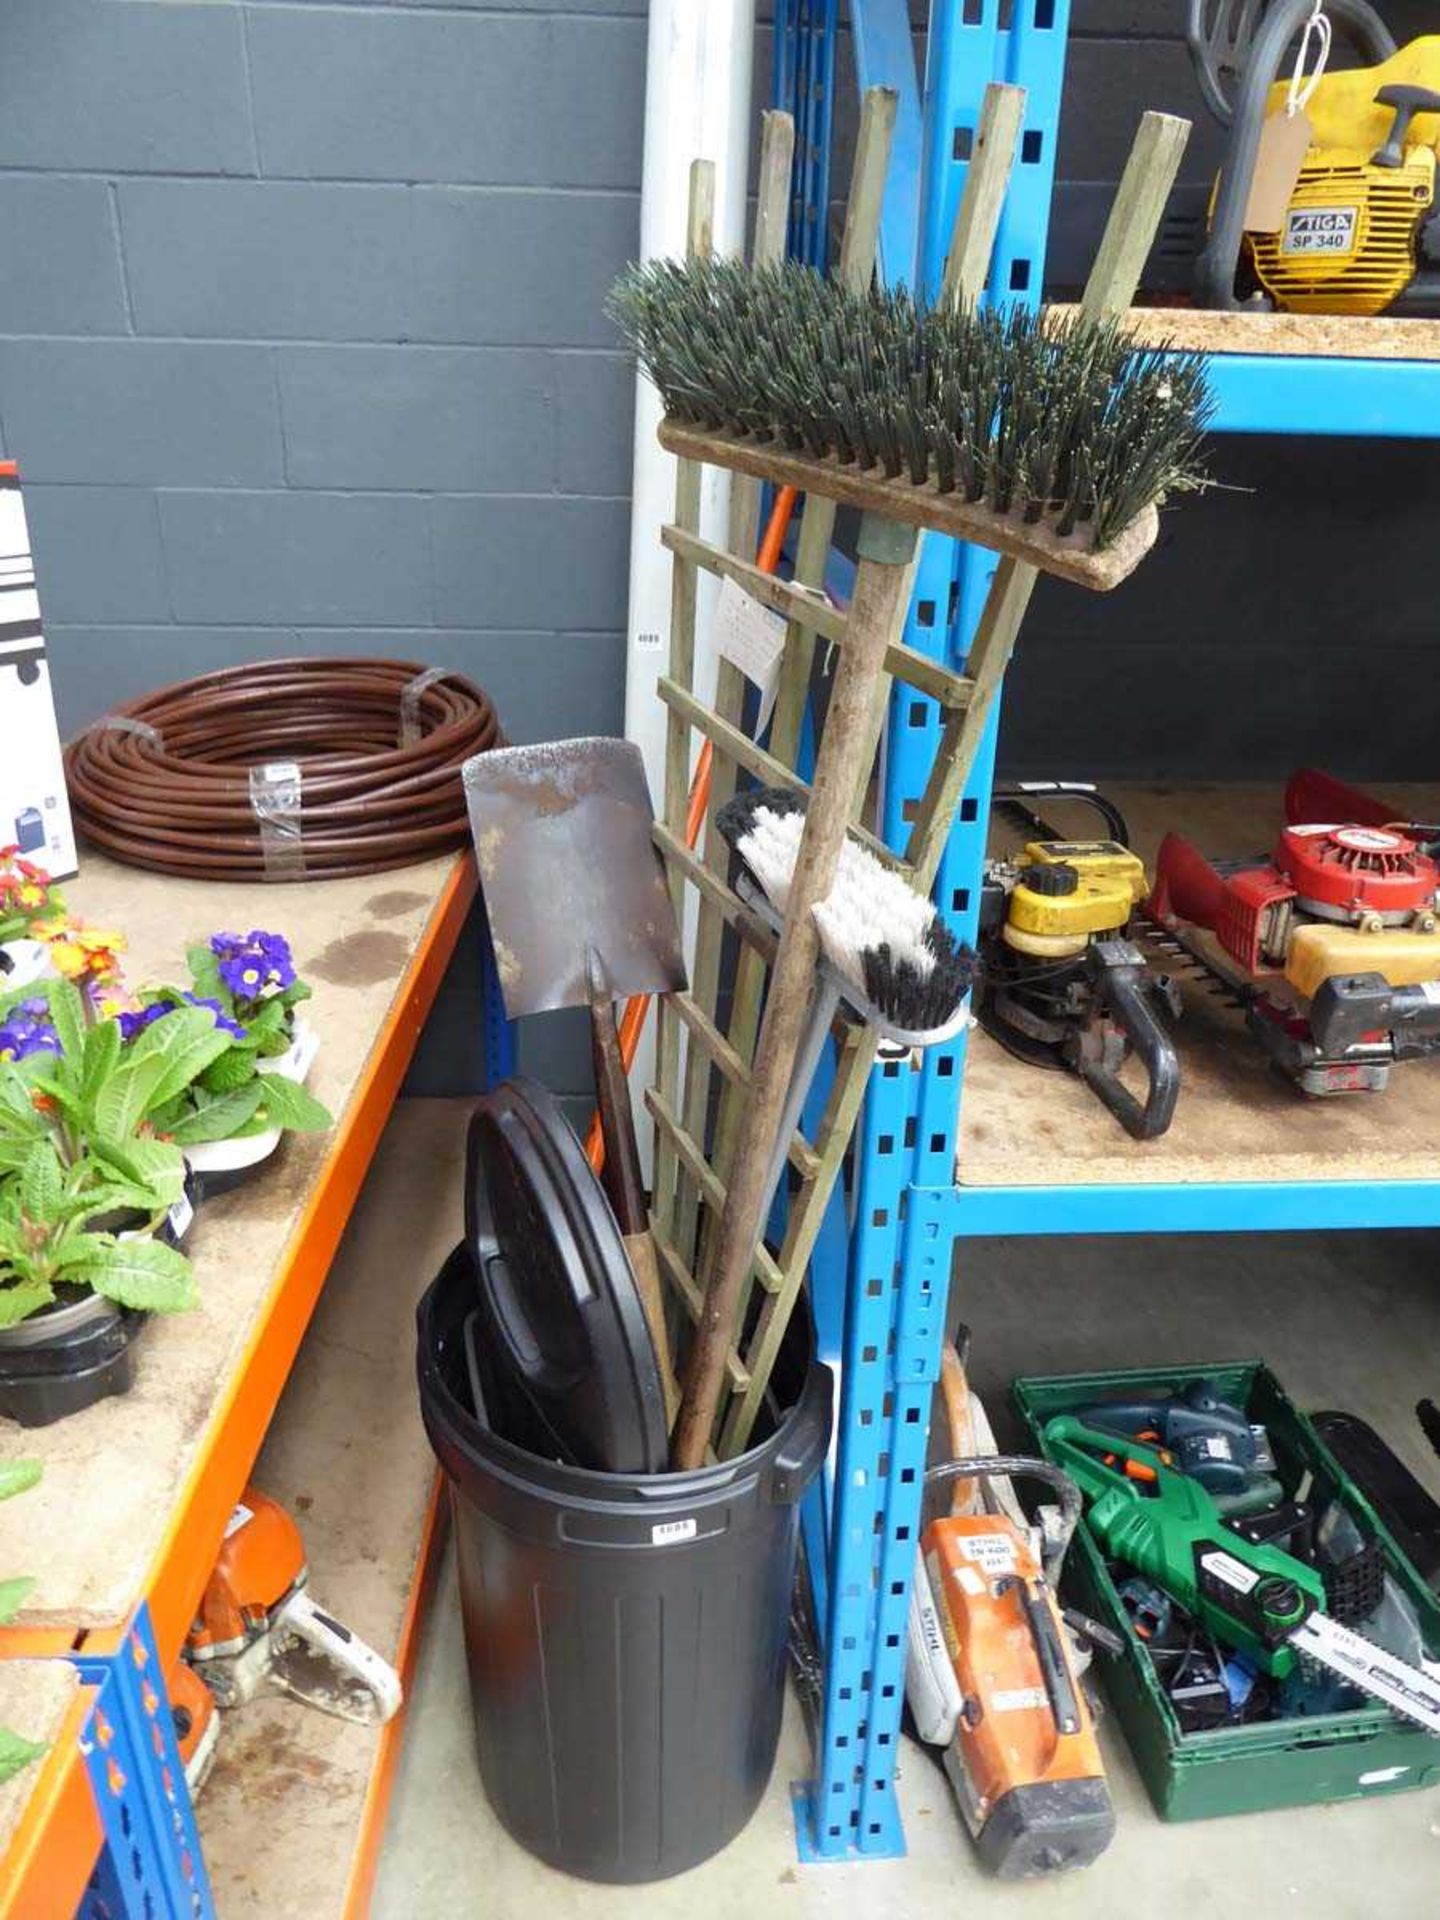 Plastic bin containing garden tools to include brushes, spades, and trellis